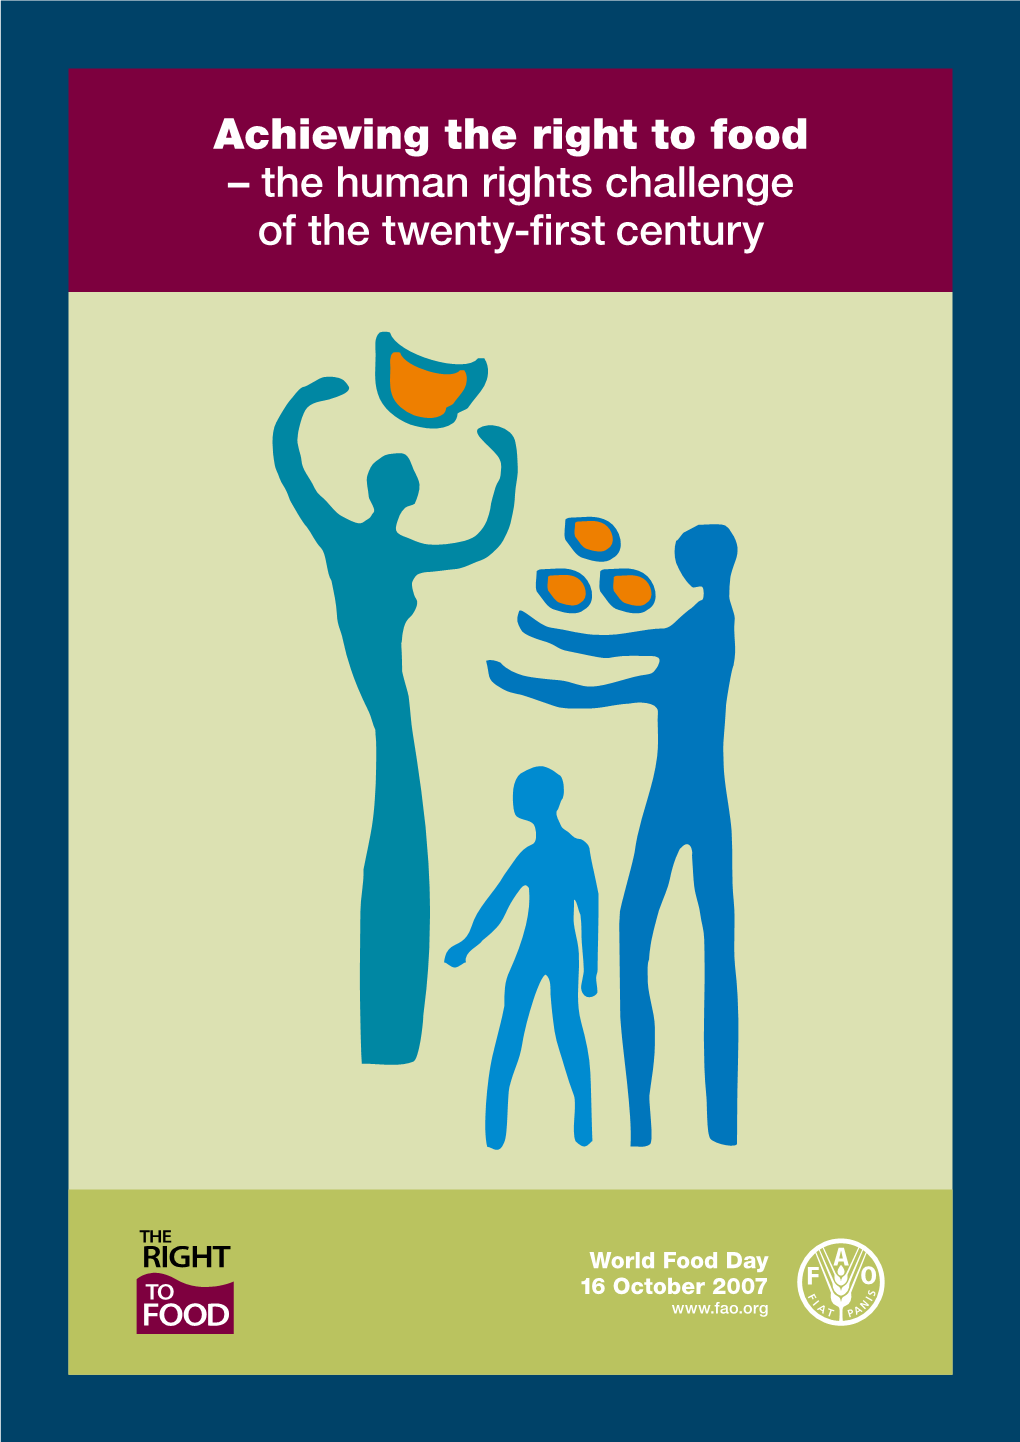 The Human Rights Challenge of the Twenty-First Century